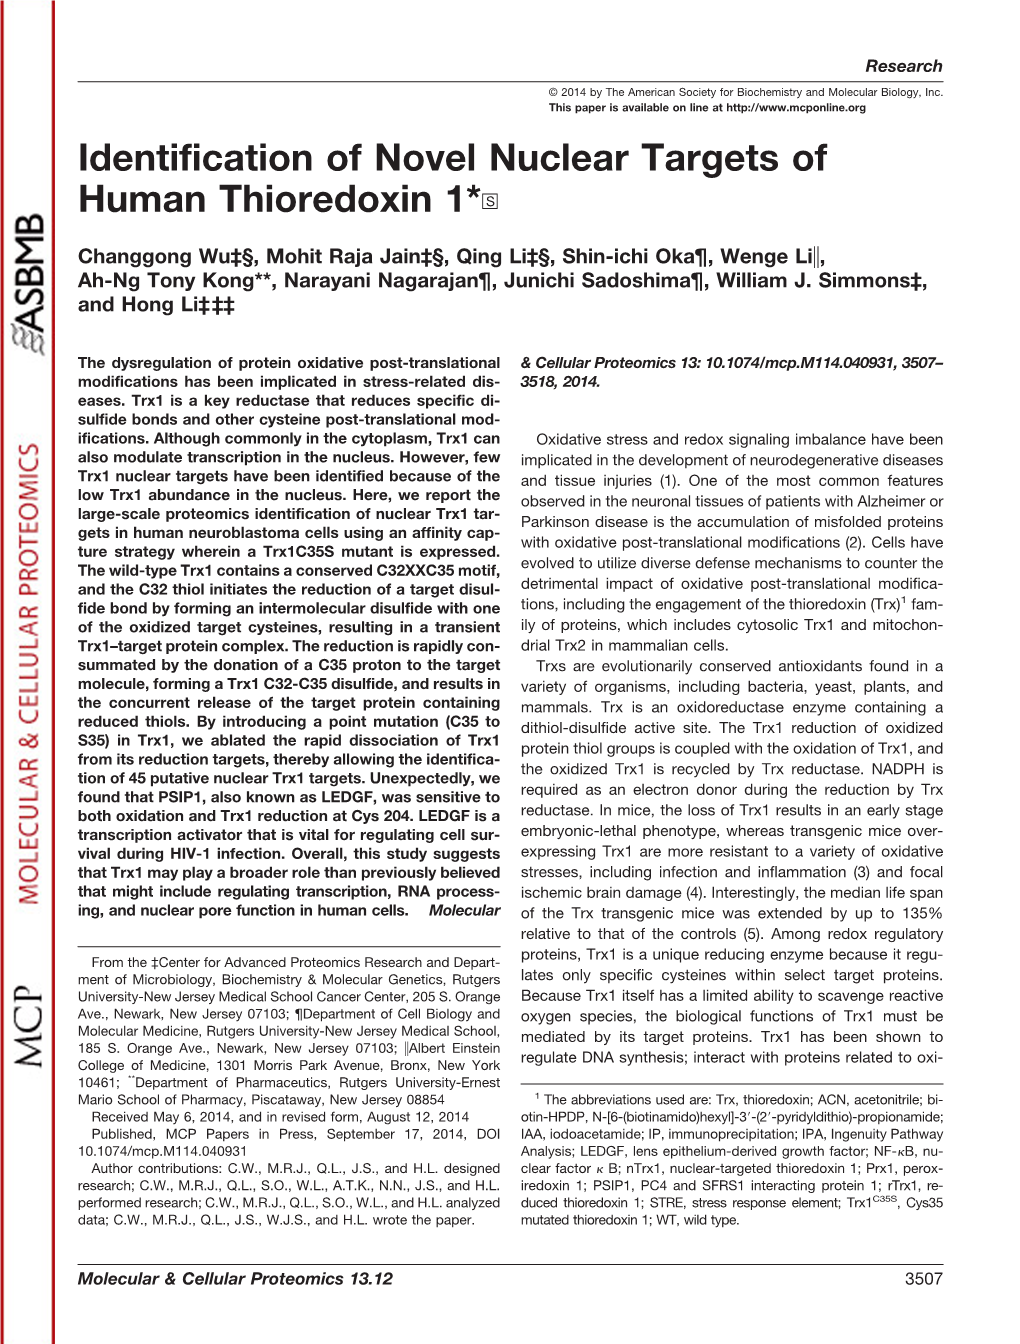 Identification of Novel Nuclear Targets of Human Thioredoxin 1*DS